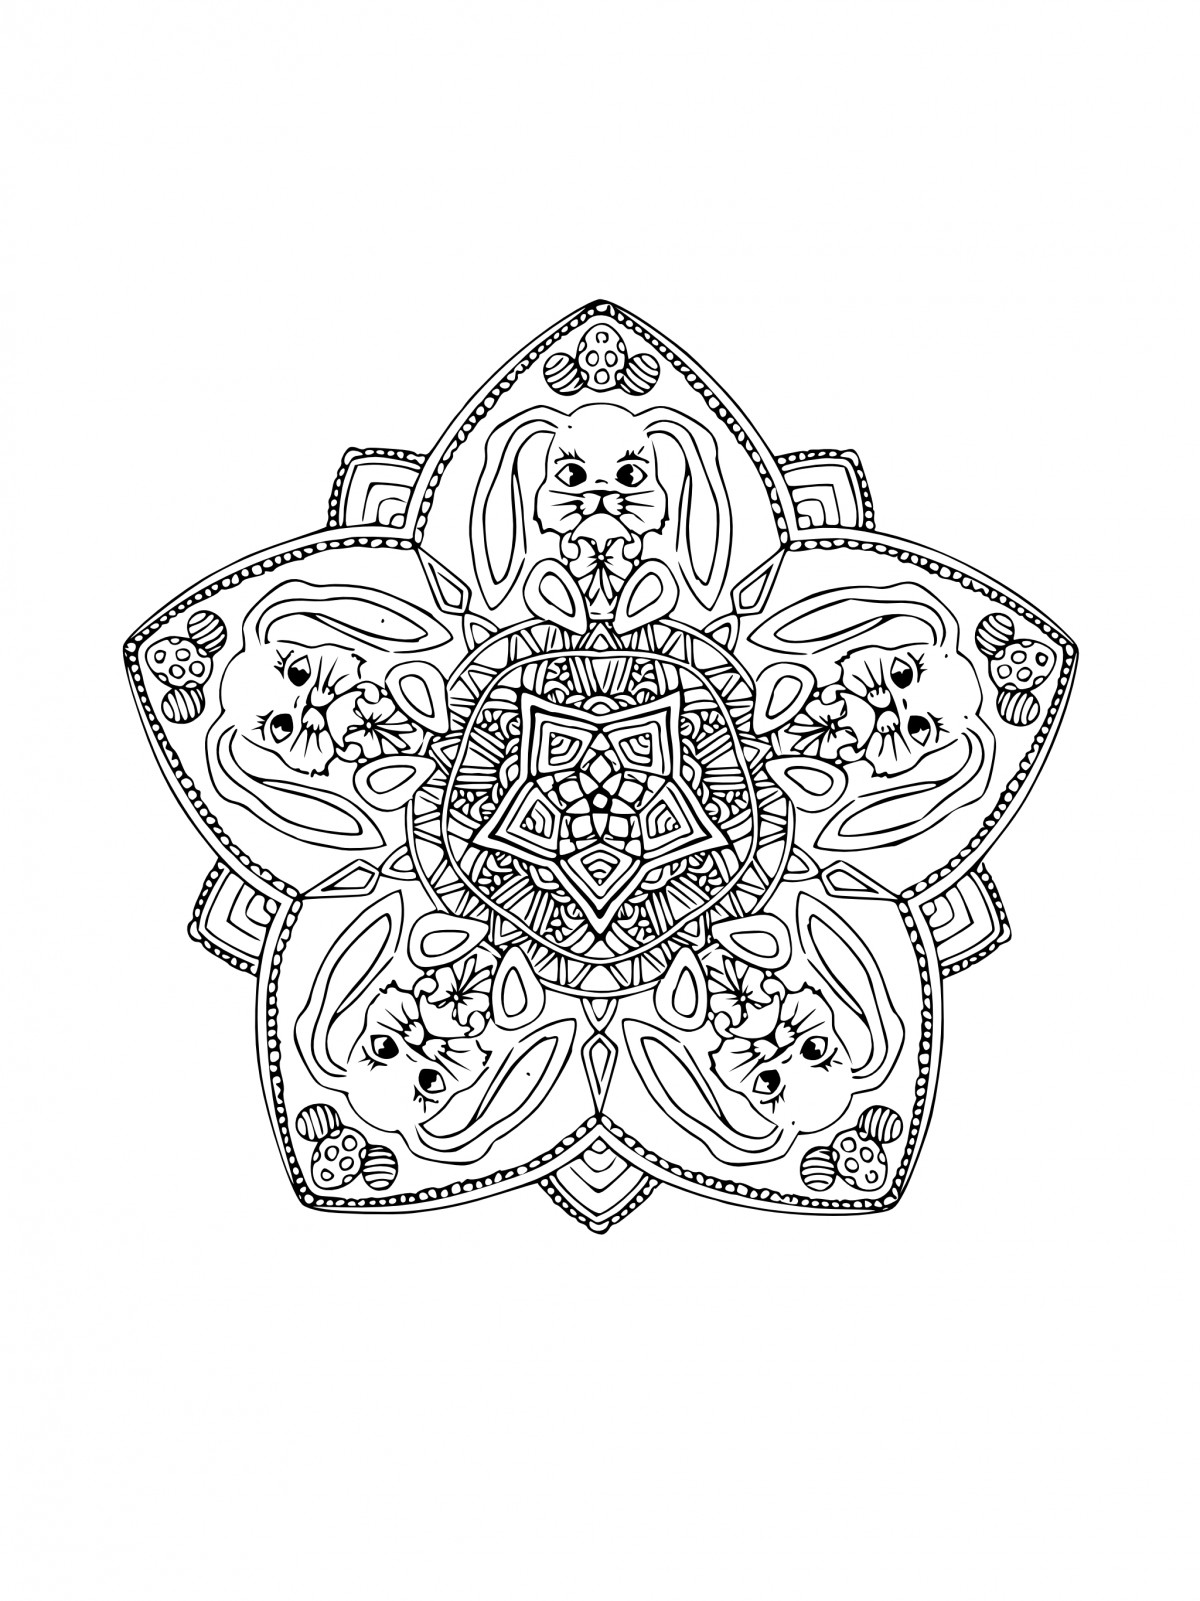 Adult Coloring Pages Printable – Easter Mandalas to color